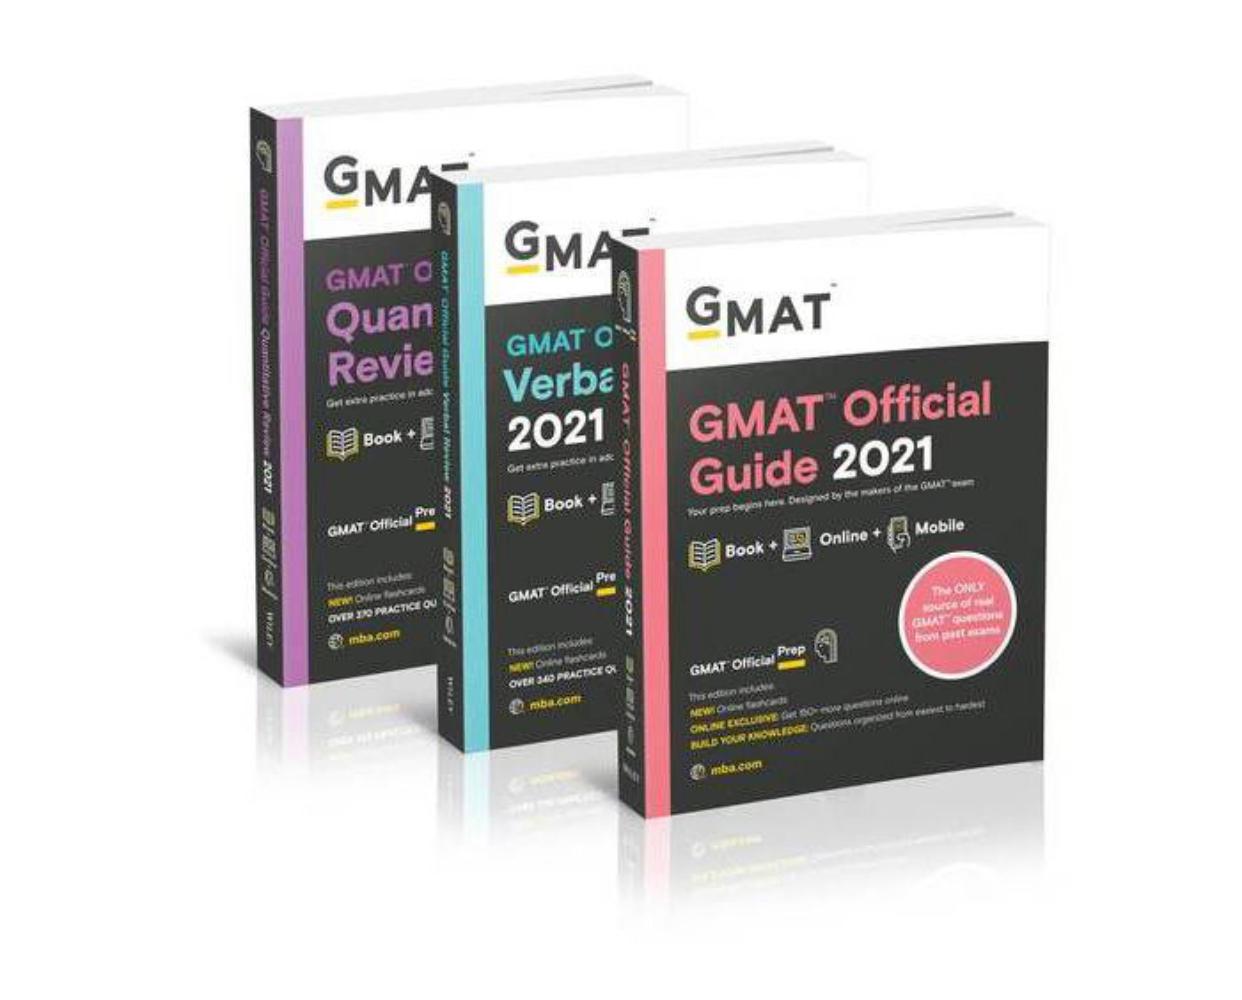 GMAT OFFICIAL GUIDE 2021 collection